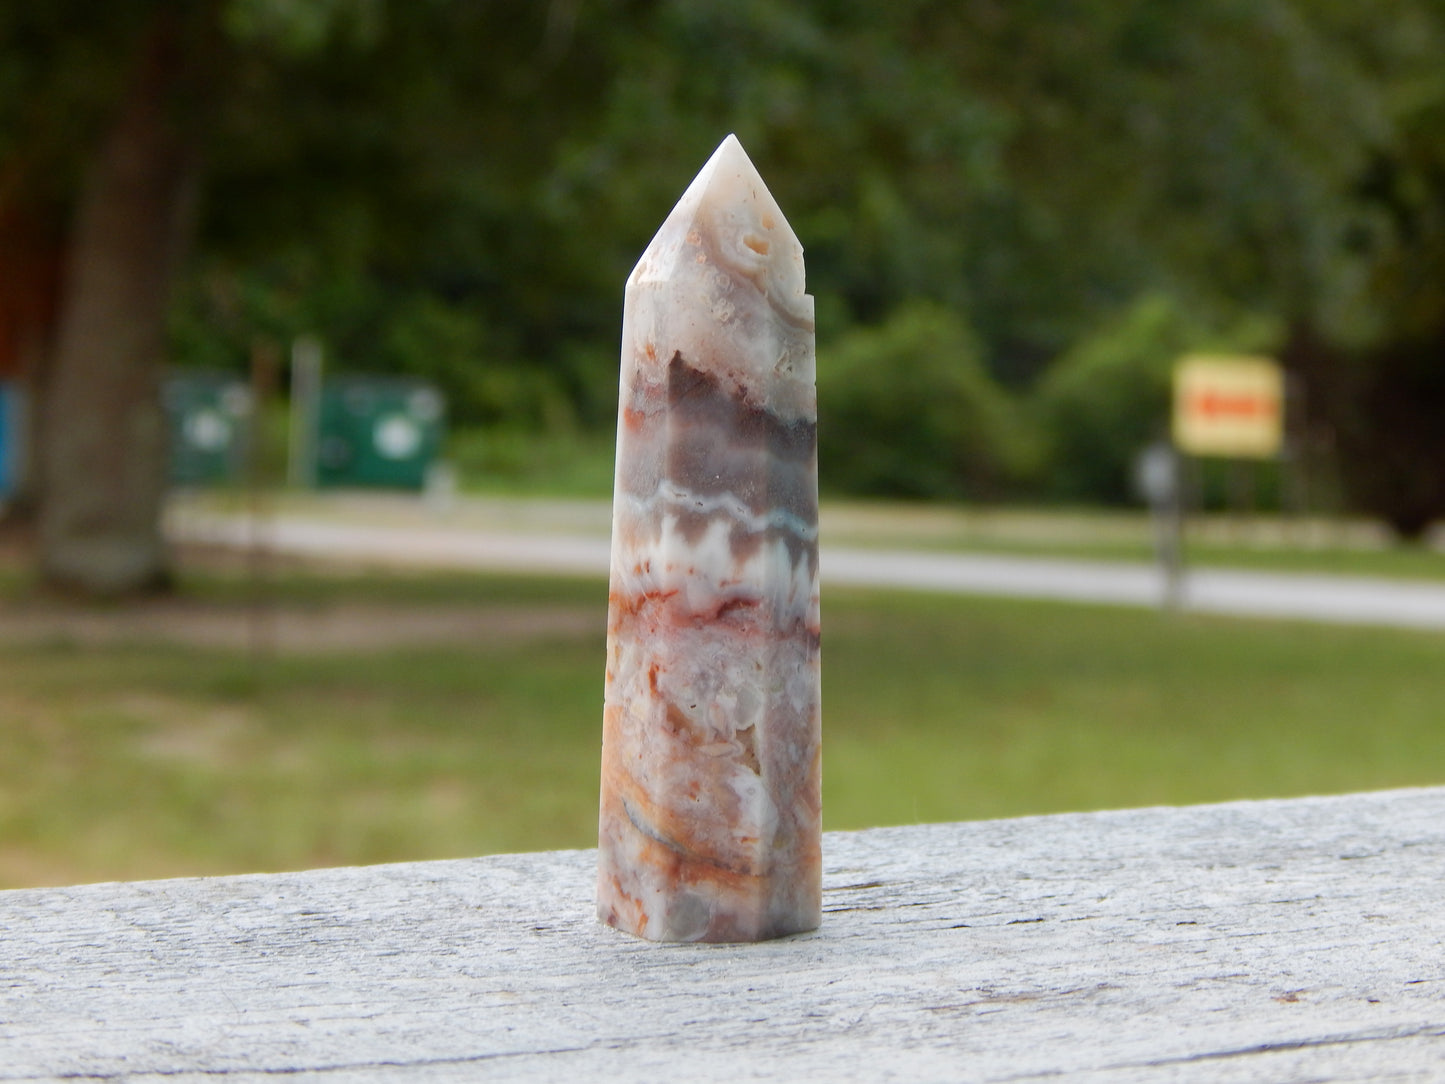 Crazy lace agate tower